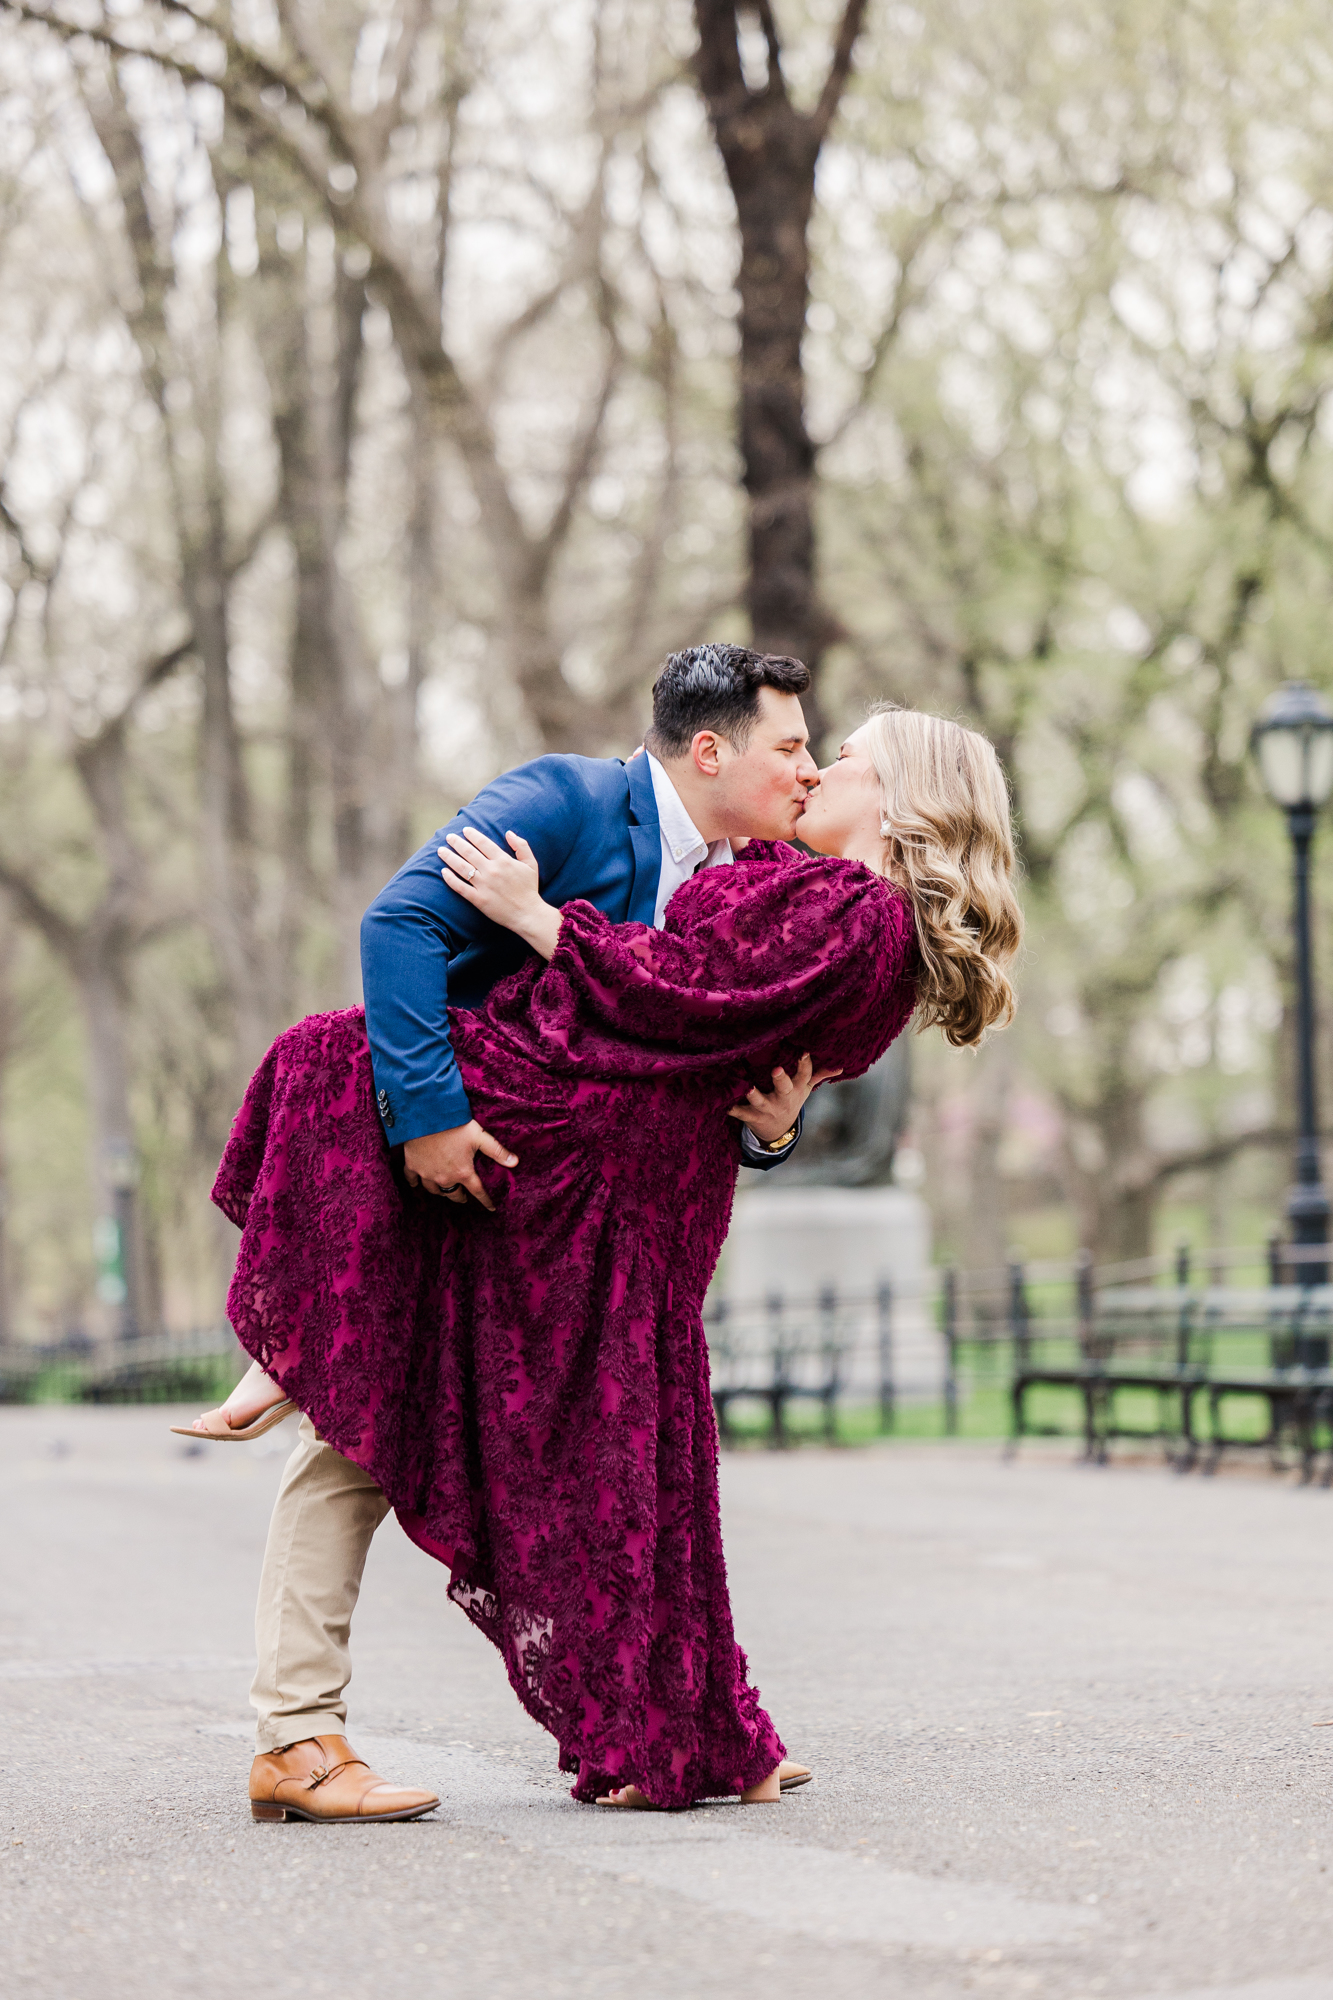 Terrific Engagement Pictures in Central Park